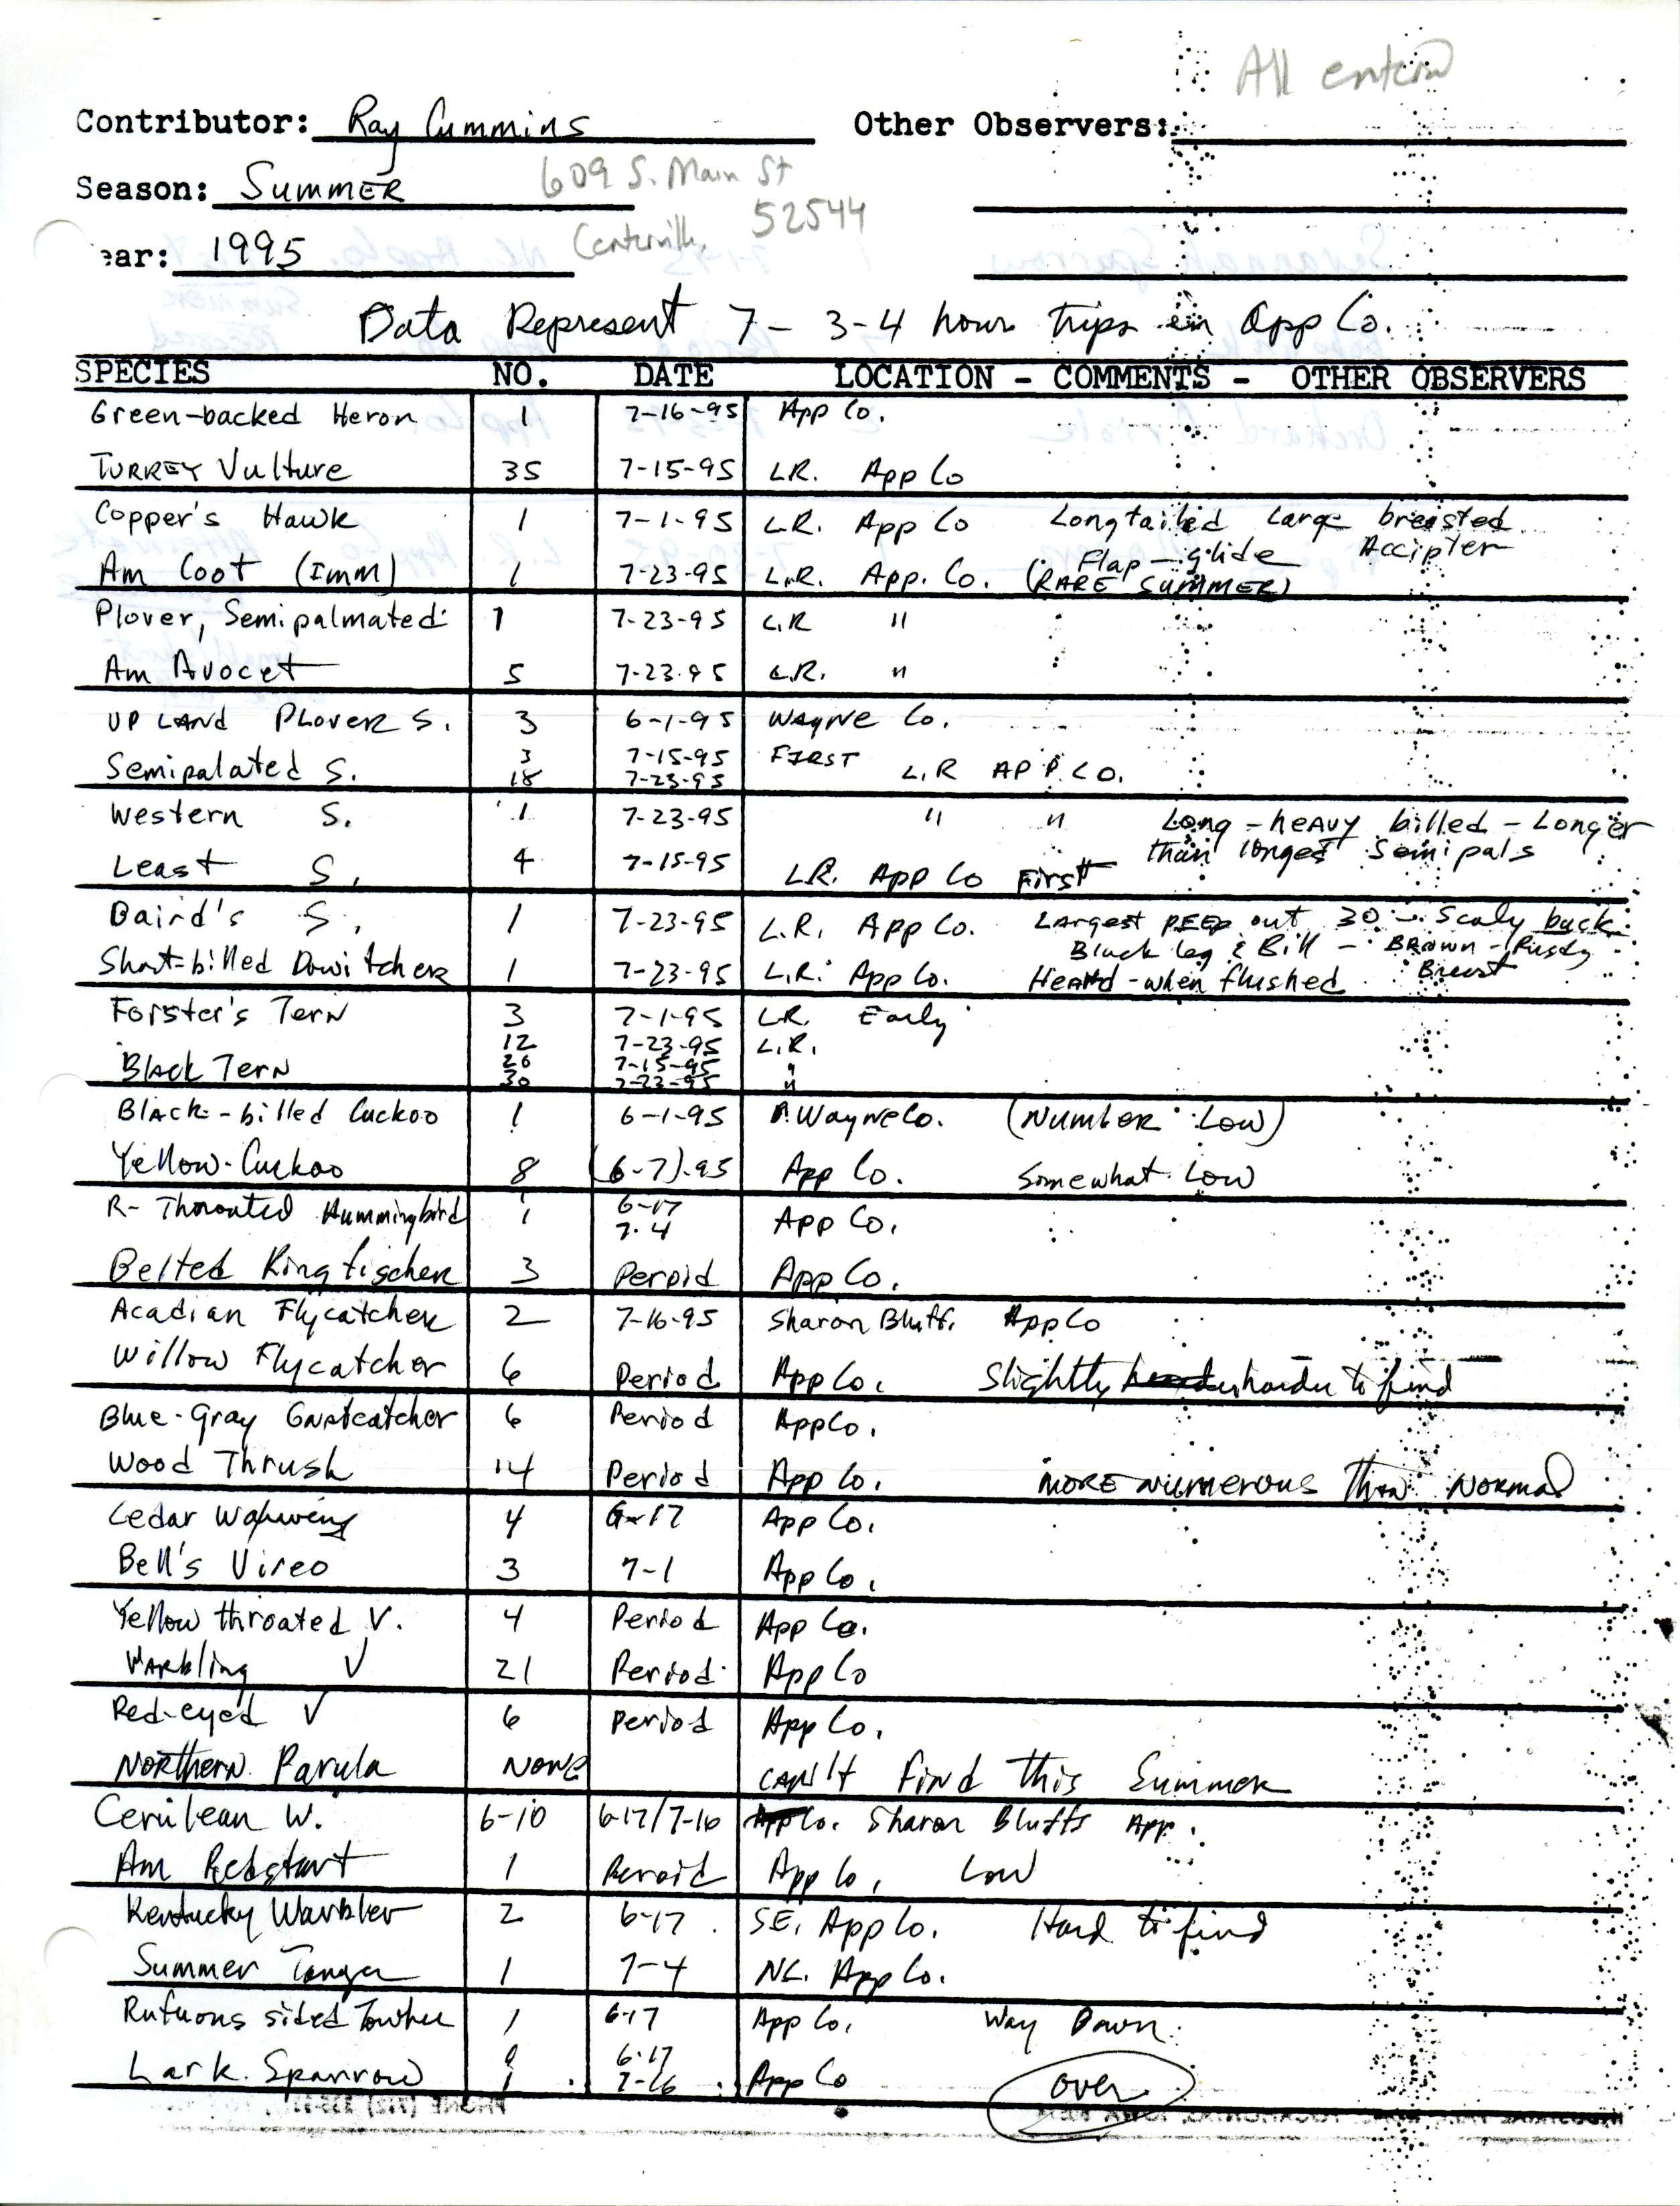 Field reports form for submitting seasonal observations of Iowa birds, summer 1995, Ray Cummins